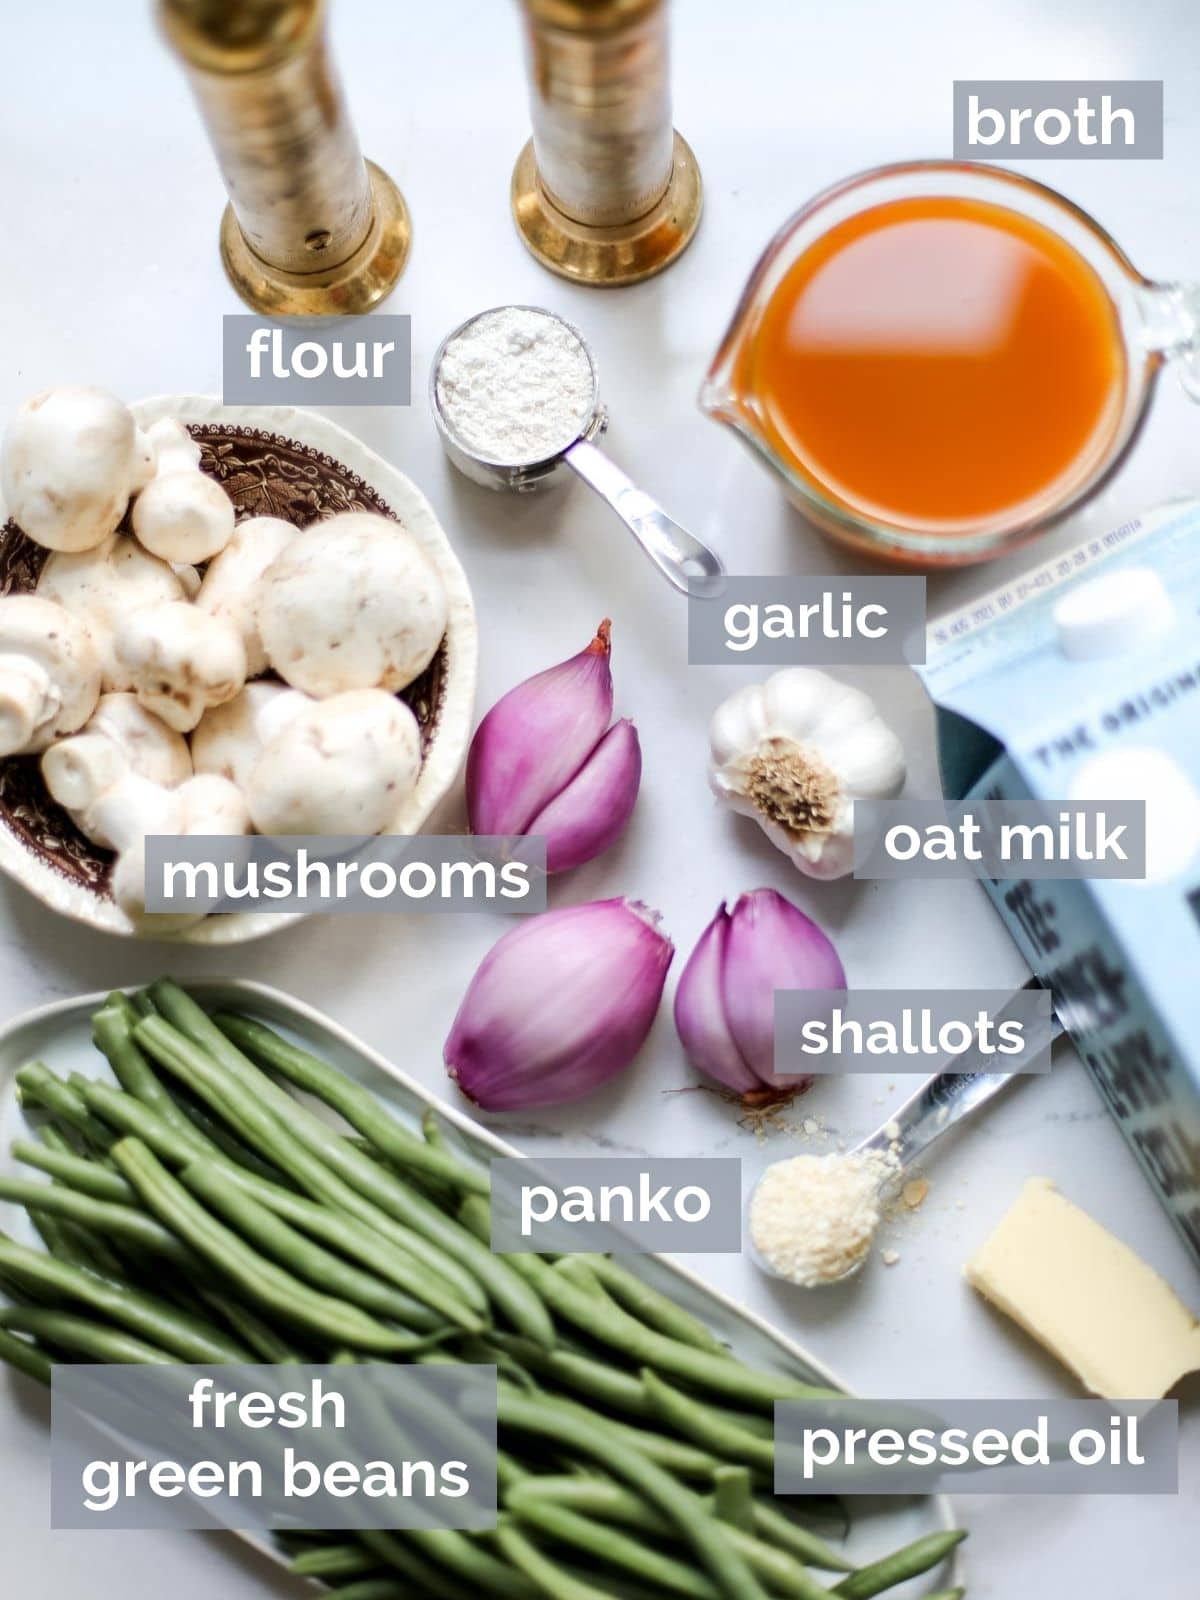 Green beans, mushrooms, broth, shallots, milk, and seasonings on a white table.